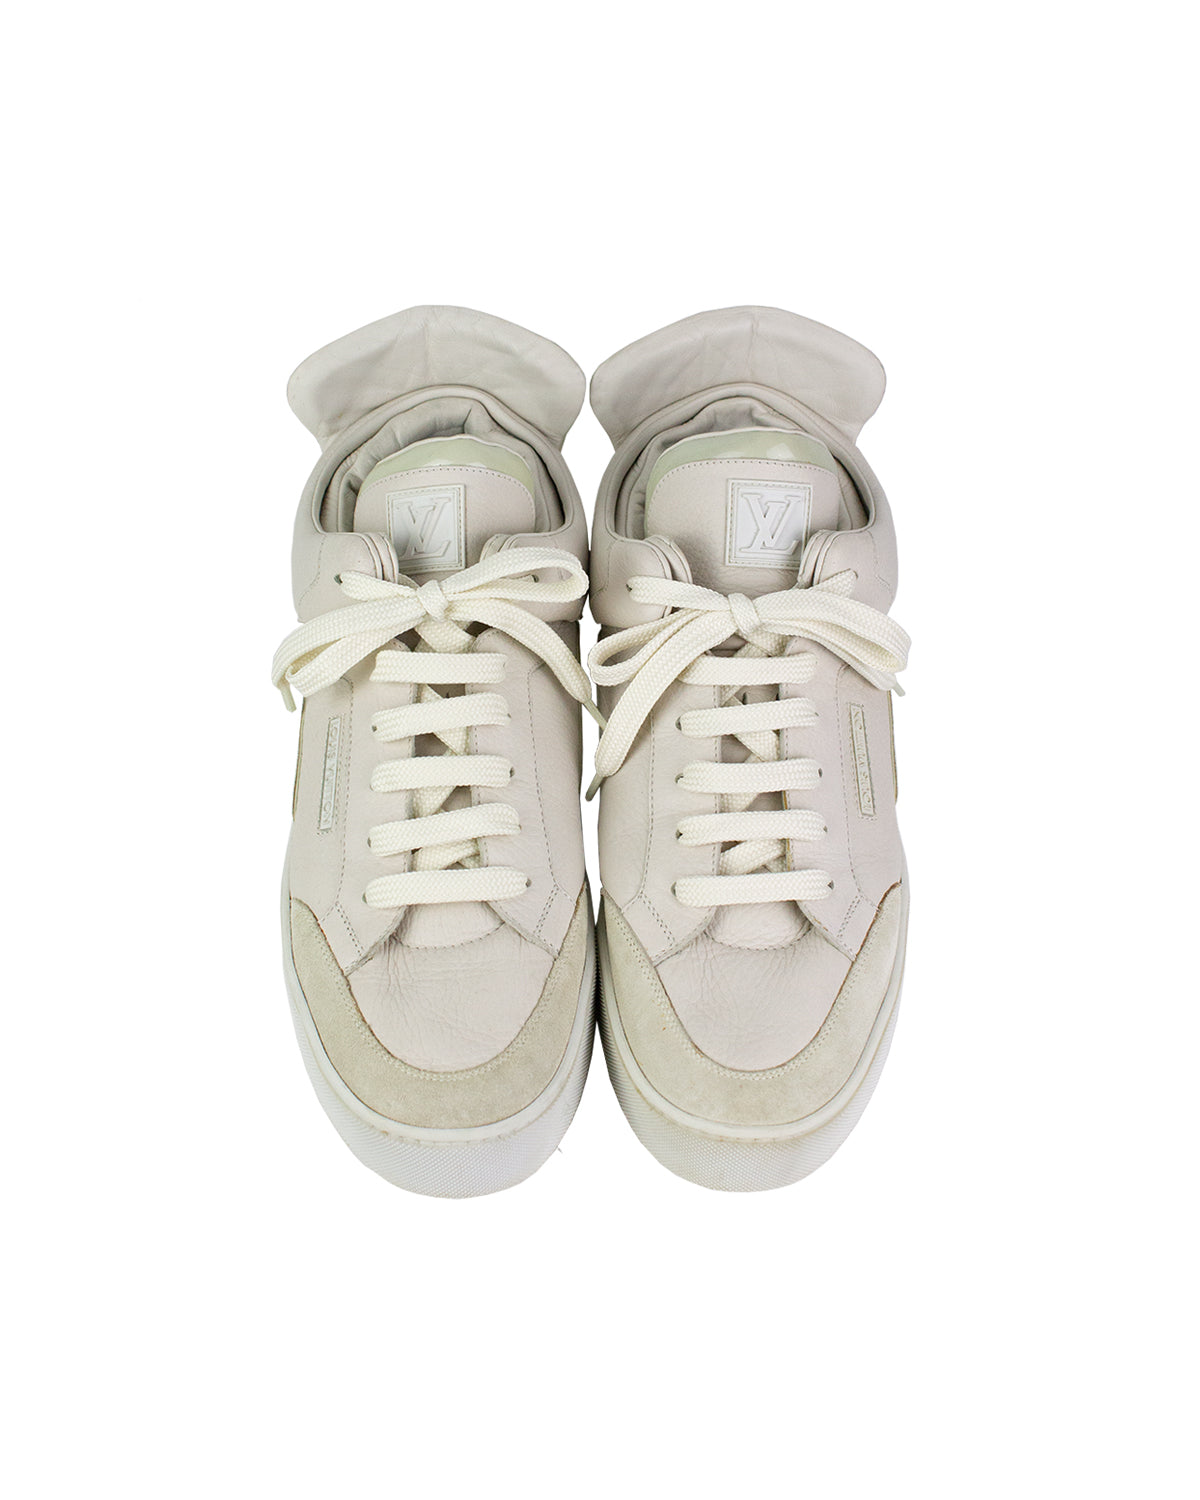 LOUIS VUITTON X KANYE WEST Calfskin Suede Don Sneakers 8.5 Cream 1089171